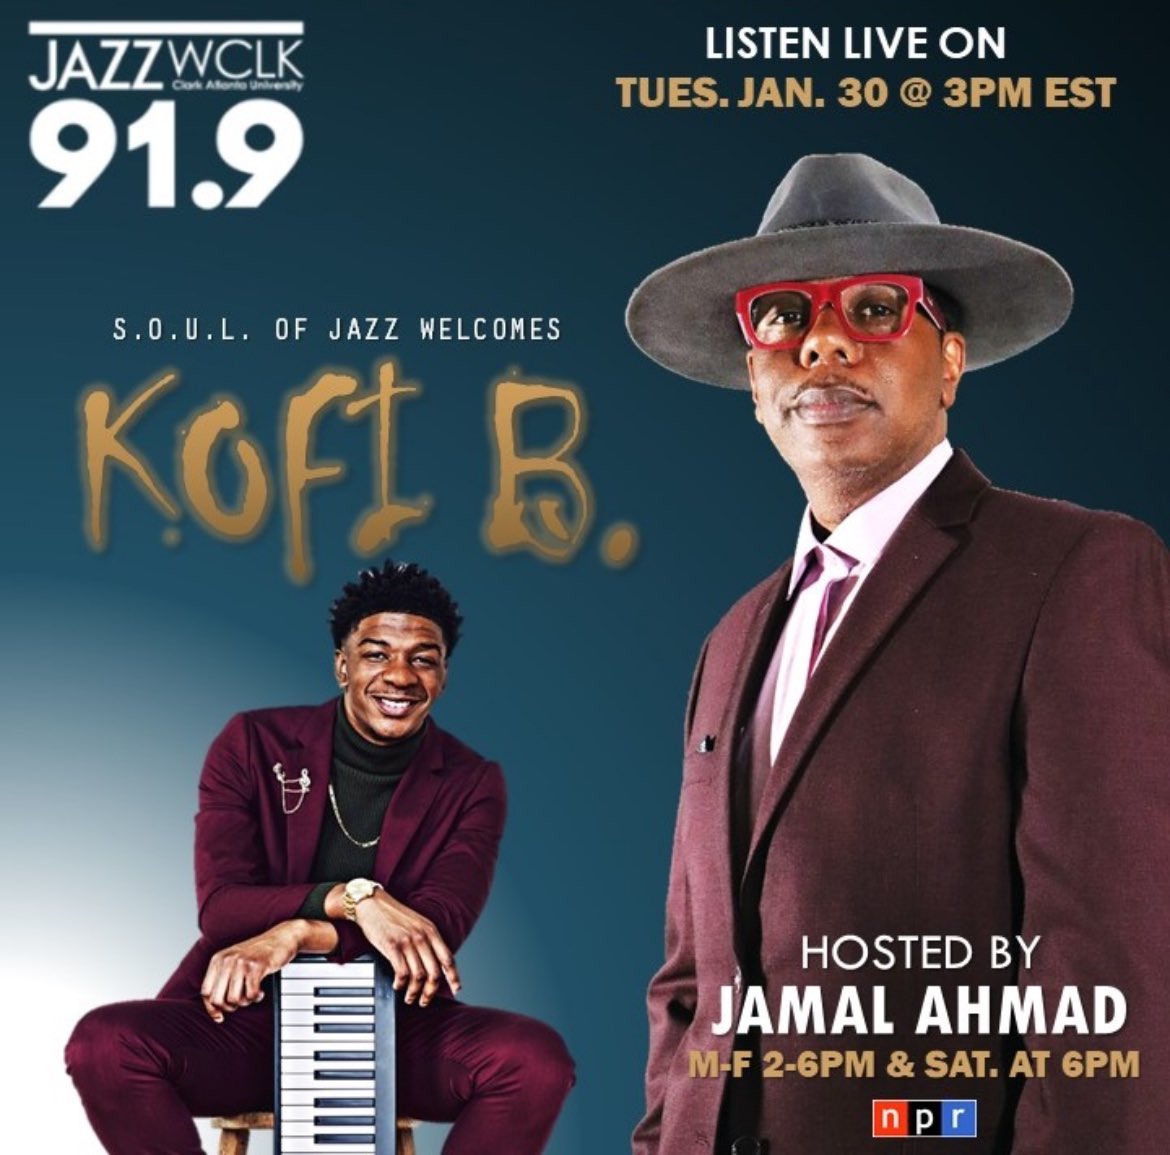 Join us today at 3pm for the #SOULofJazz with @jamalahmad19 and special guest @KofiBMusic 👏🏾✊🏿📻 #JanalAhmad #WCLK919 #HBCURadio #CAU #KofiBMusic